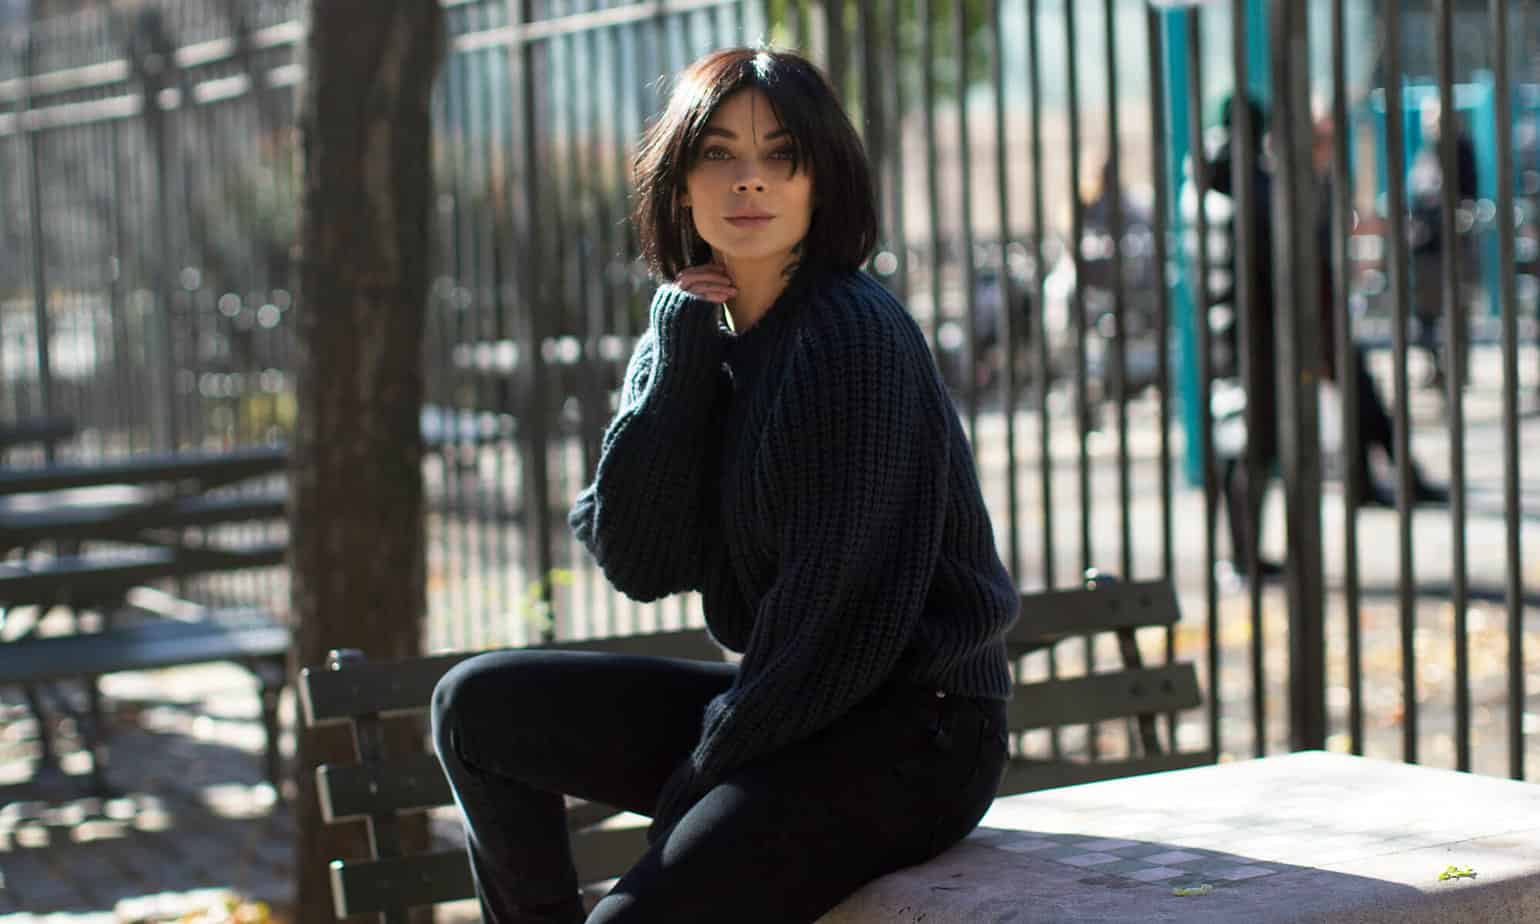 dark haired woman with black sweater and black jeans sitting on table in park